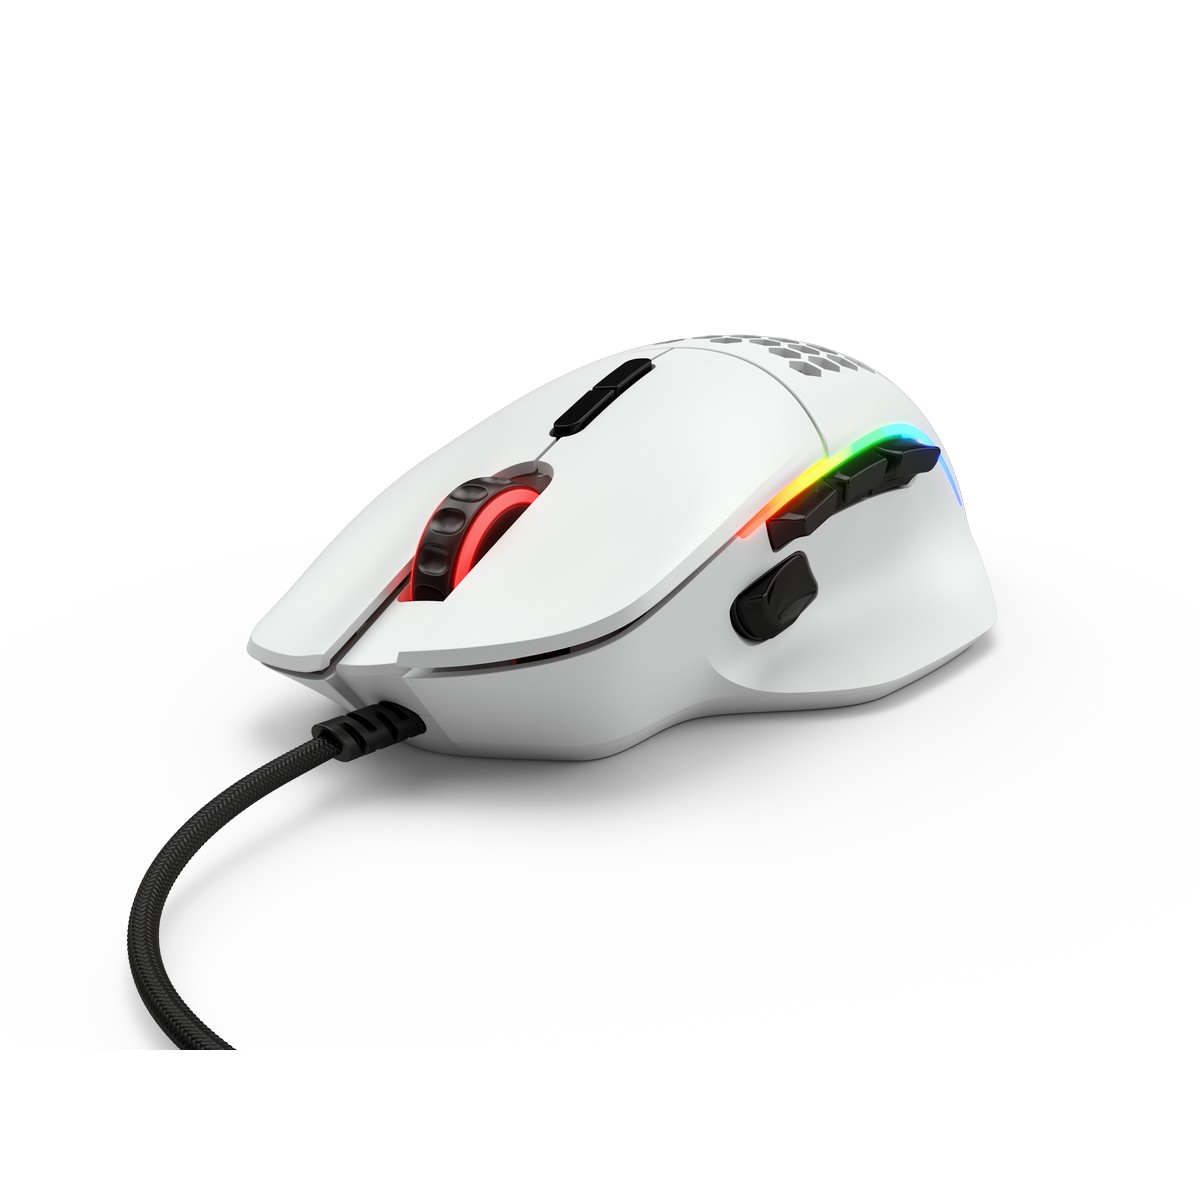 Glorious Model I USB RGB Lightweight Gaming Mouse - Matte White (GLO-MS-I-MB)